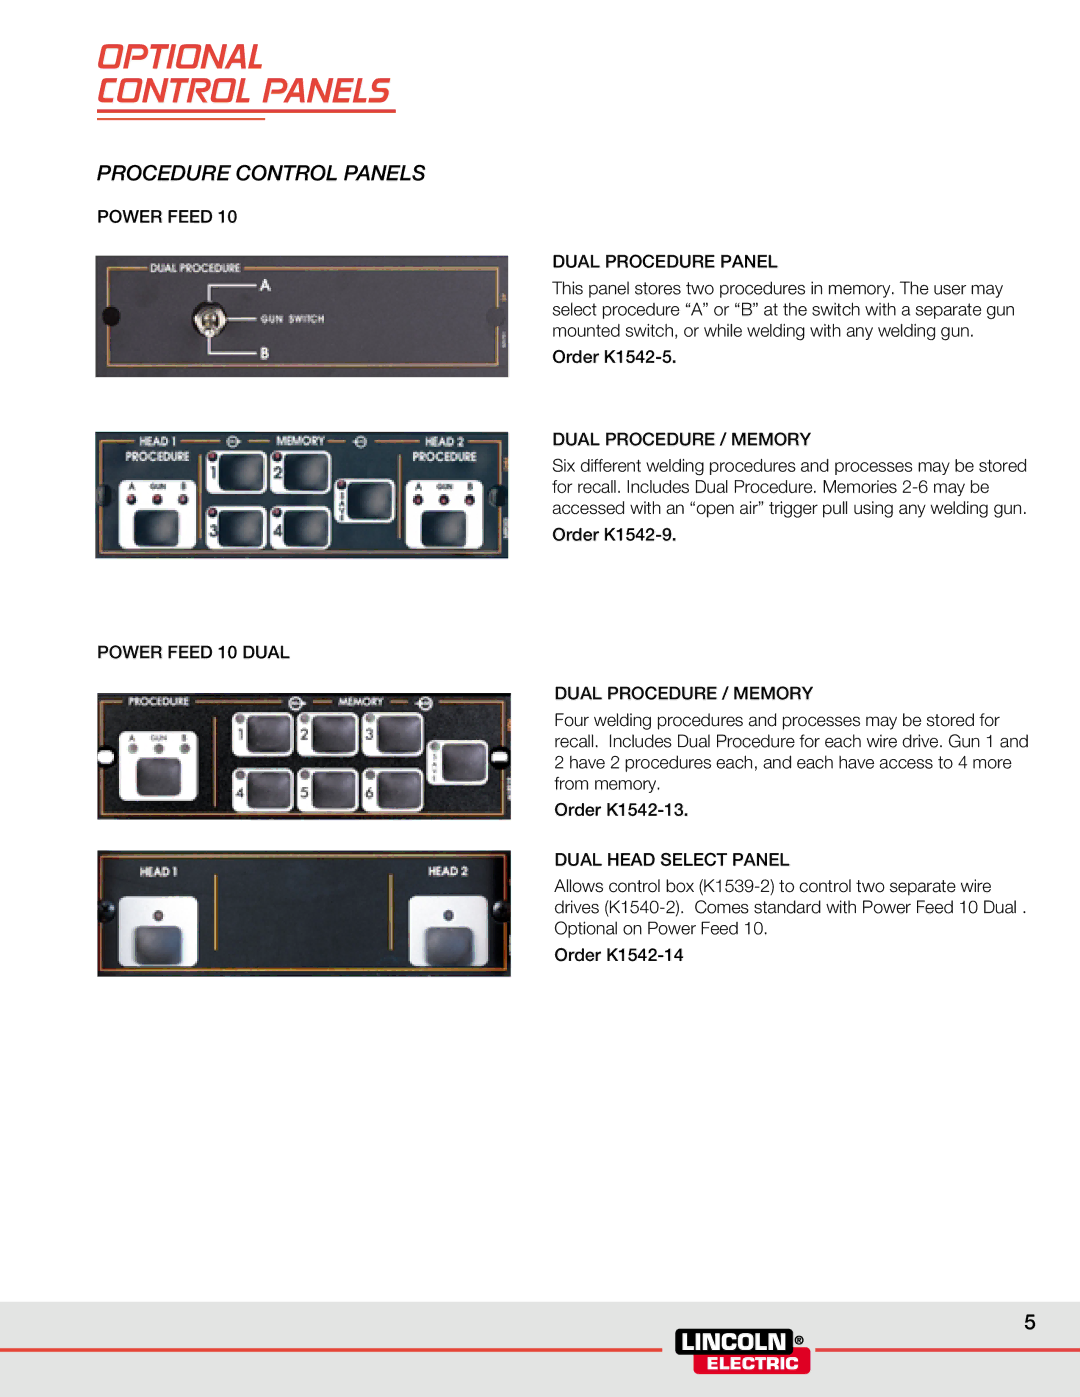 Lincoln Electric WELDING SYSTEMS manual Optional Control Panels, Power Feed Dual Procedure Panel, Dual Procedure / Memory 